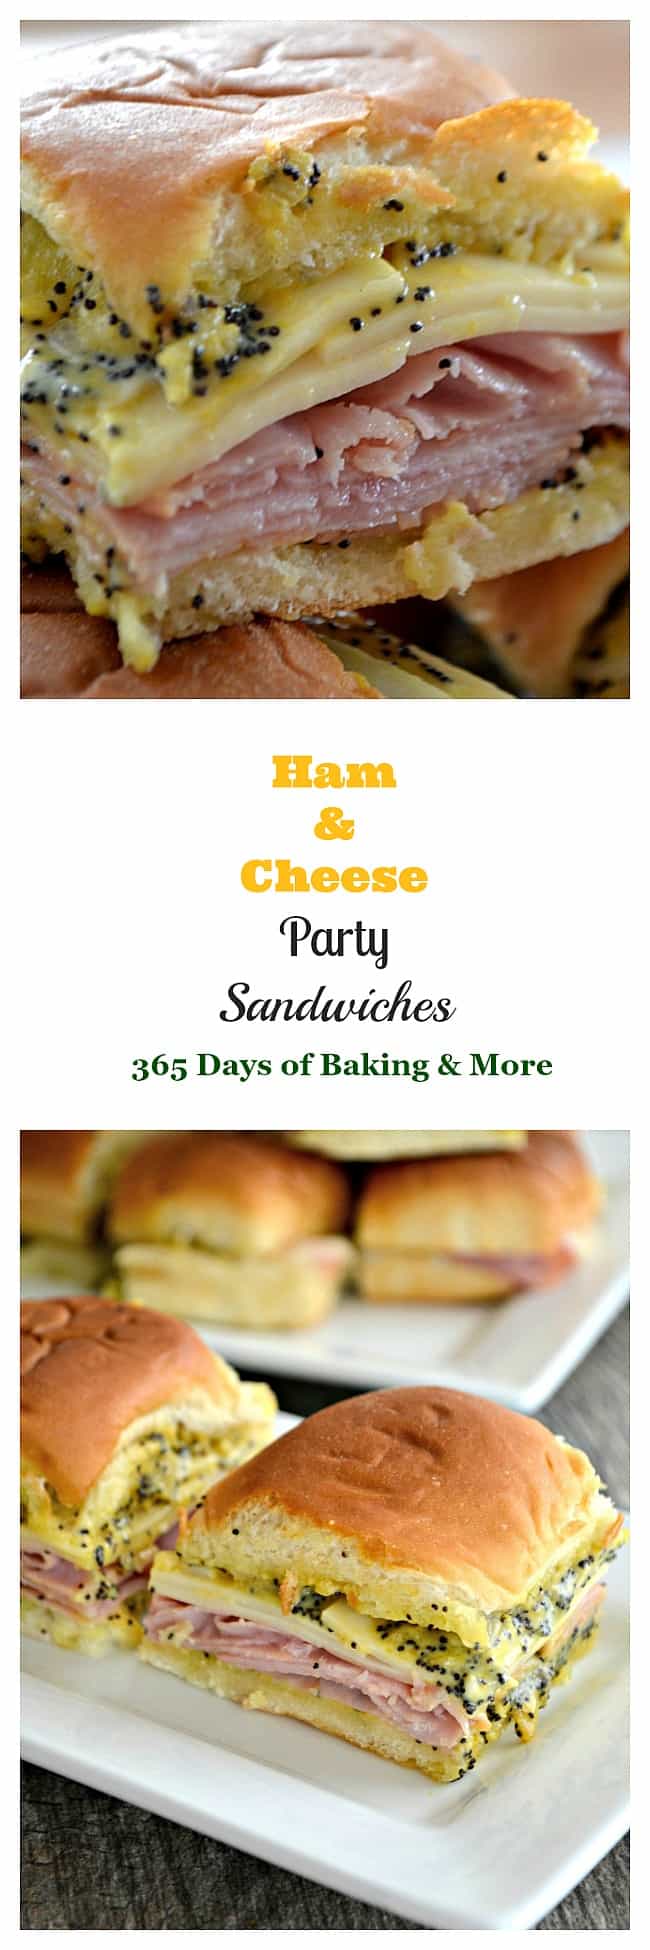 These Ham and Cheese Party Sandwiches on Hawaiian rolls with a poppy seed, mustard spread are perfect for your Game Day entertaining! 